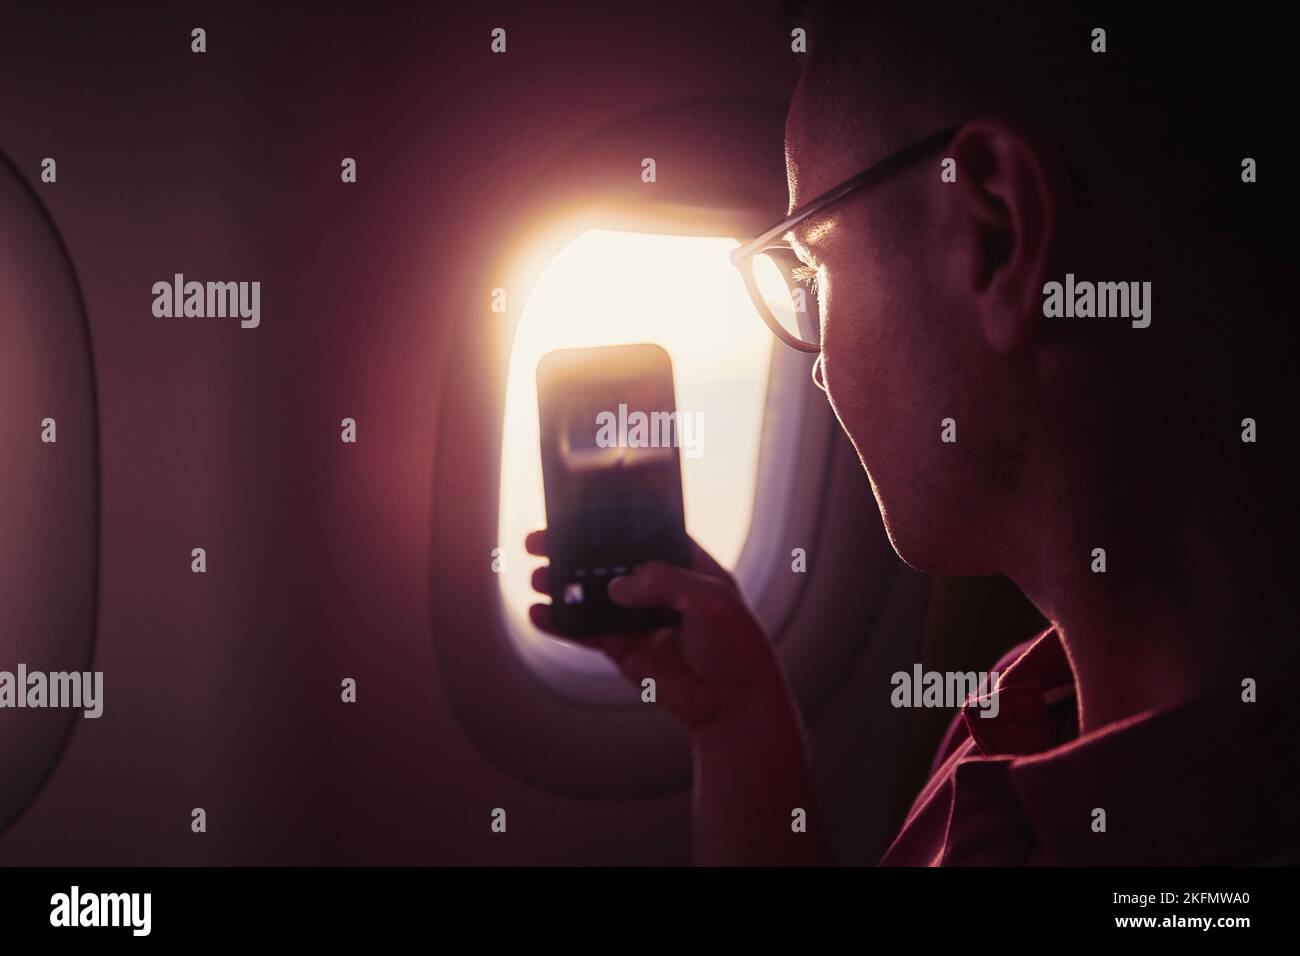 Portrait of man while taking pictures through airplane window. Passenger using phone during flight at beautiful sunset. Stock Photo